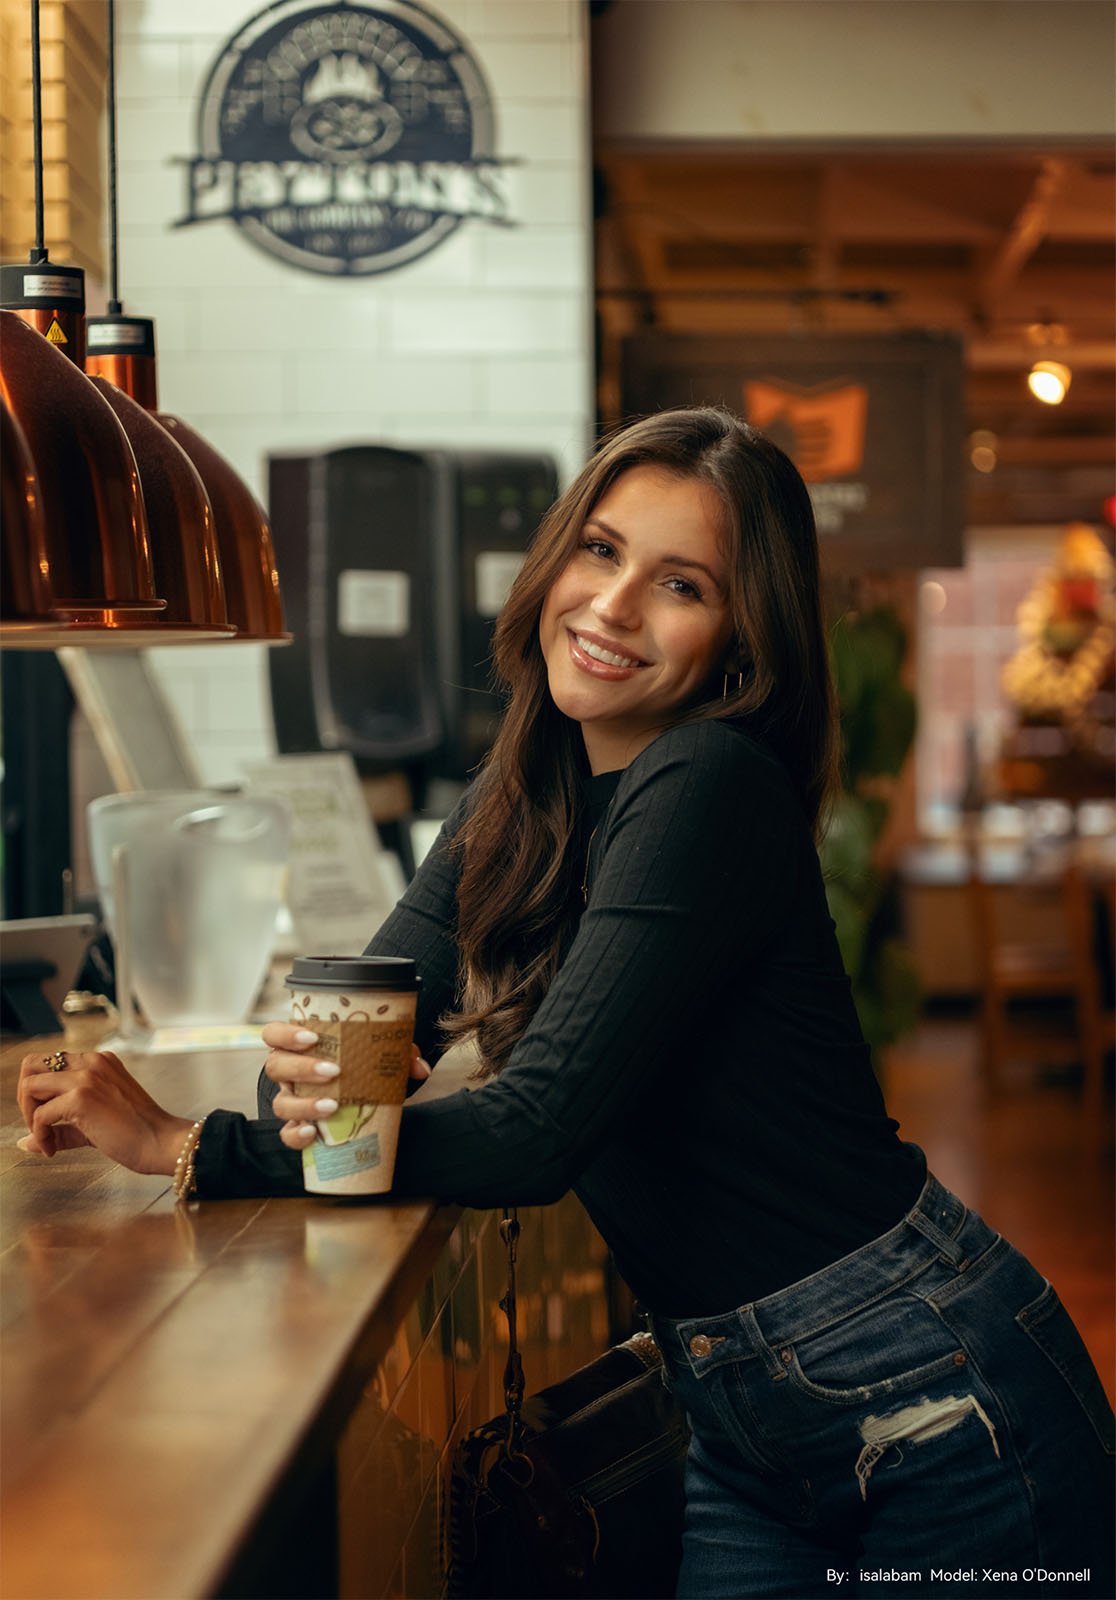 A woman with long brown hair, smiling and holding a coffee cup, leans on a cafe counter under warm lighting, with a decorative emblem in the background.